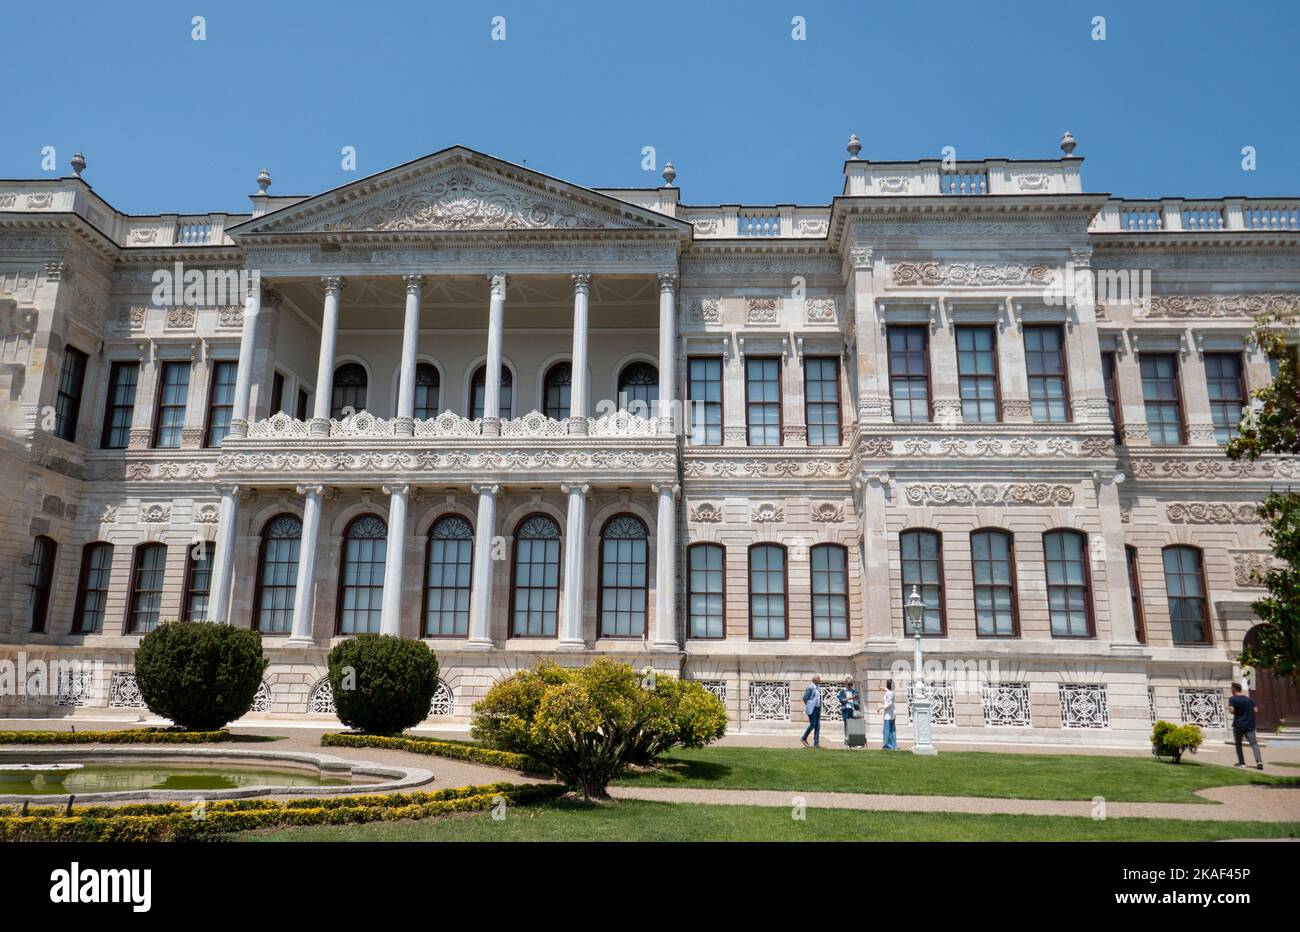 ISTANBUL, TURKEY - May 25, 2022: It is the National Museum of Palace Painting in the Dolmabahce Palace Complex. This section hosts paintings of Istanb Stock Photo